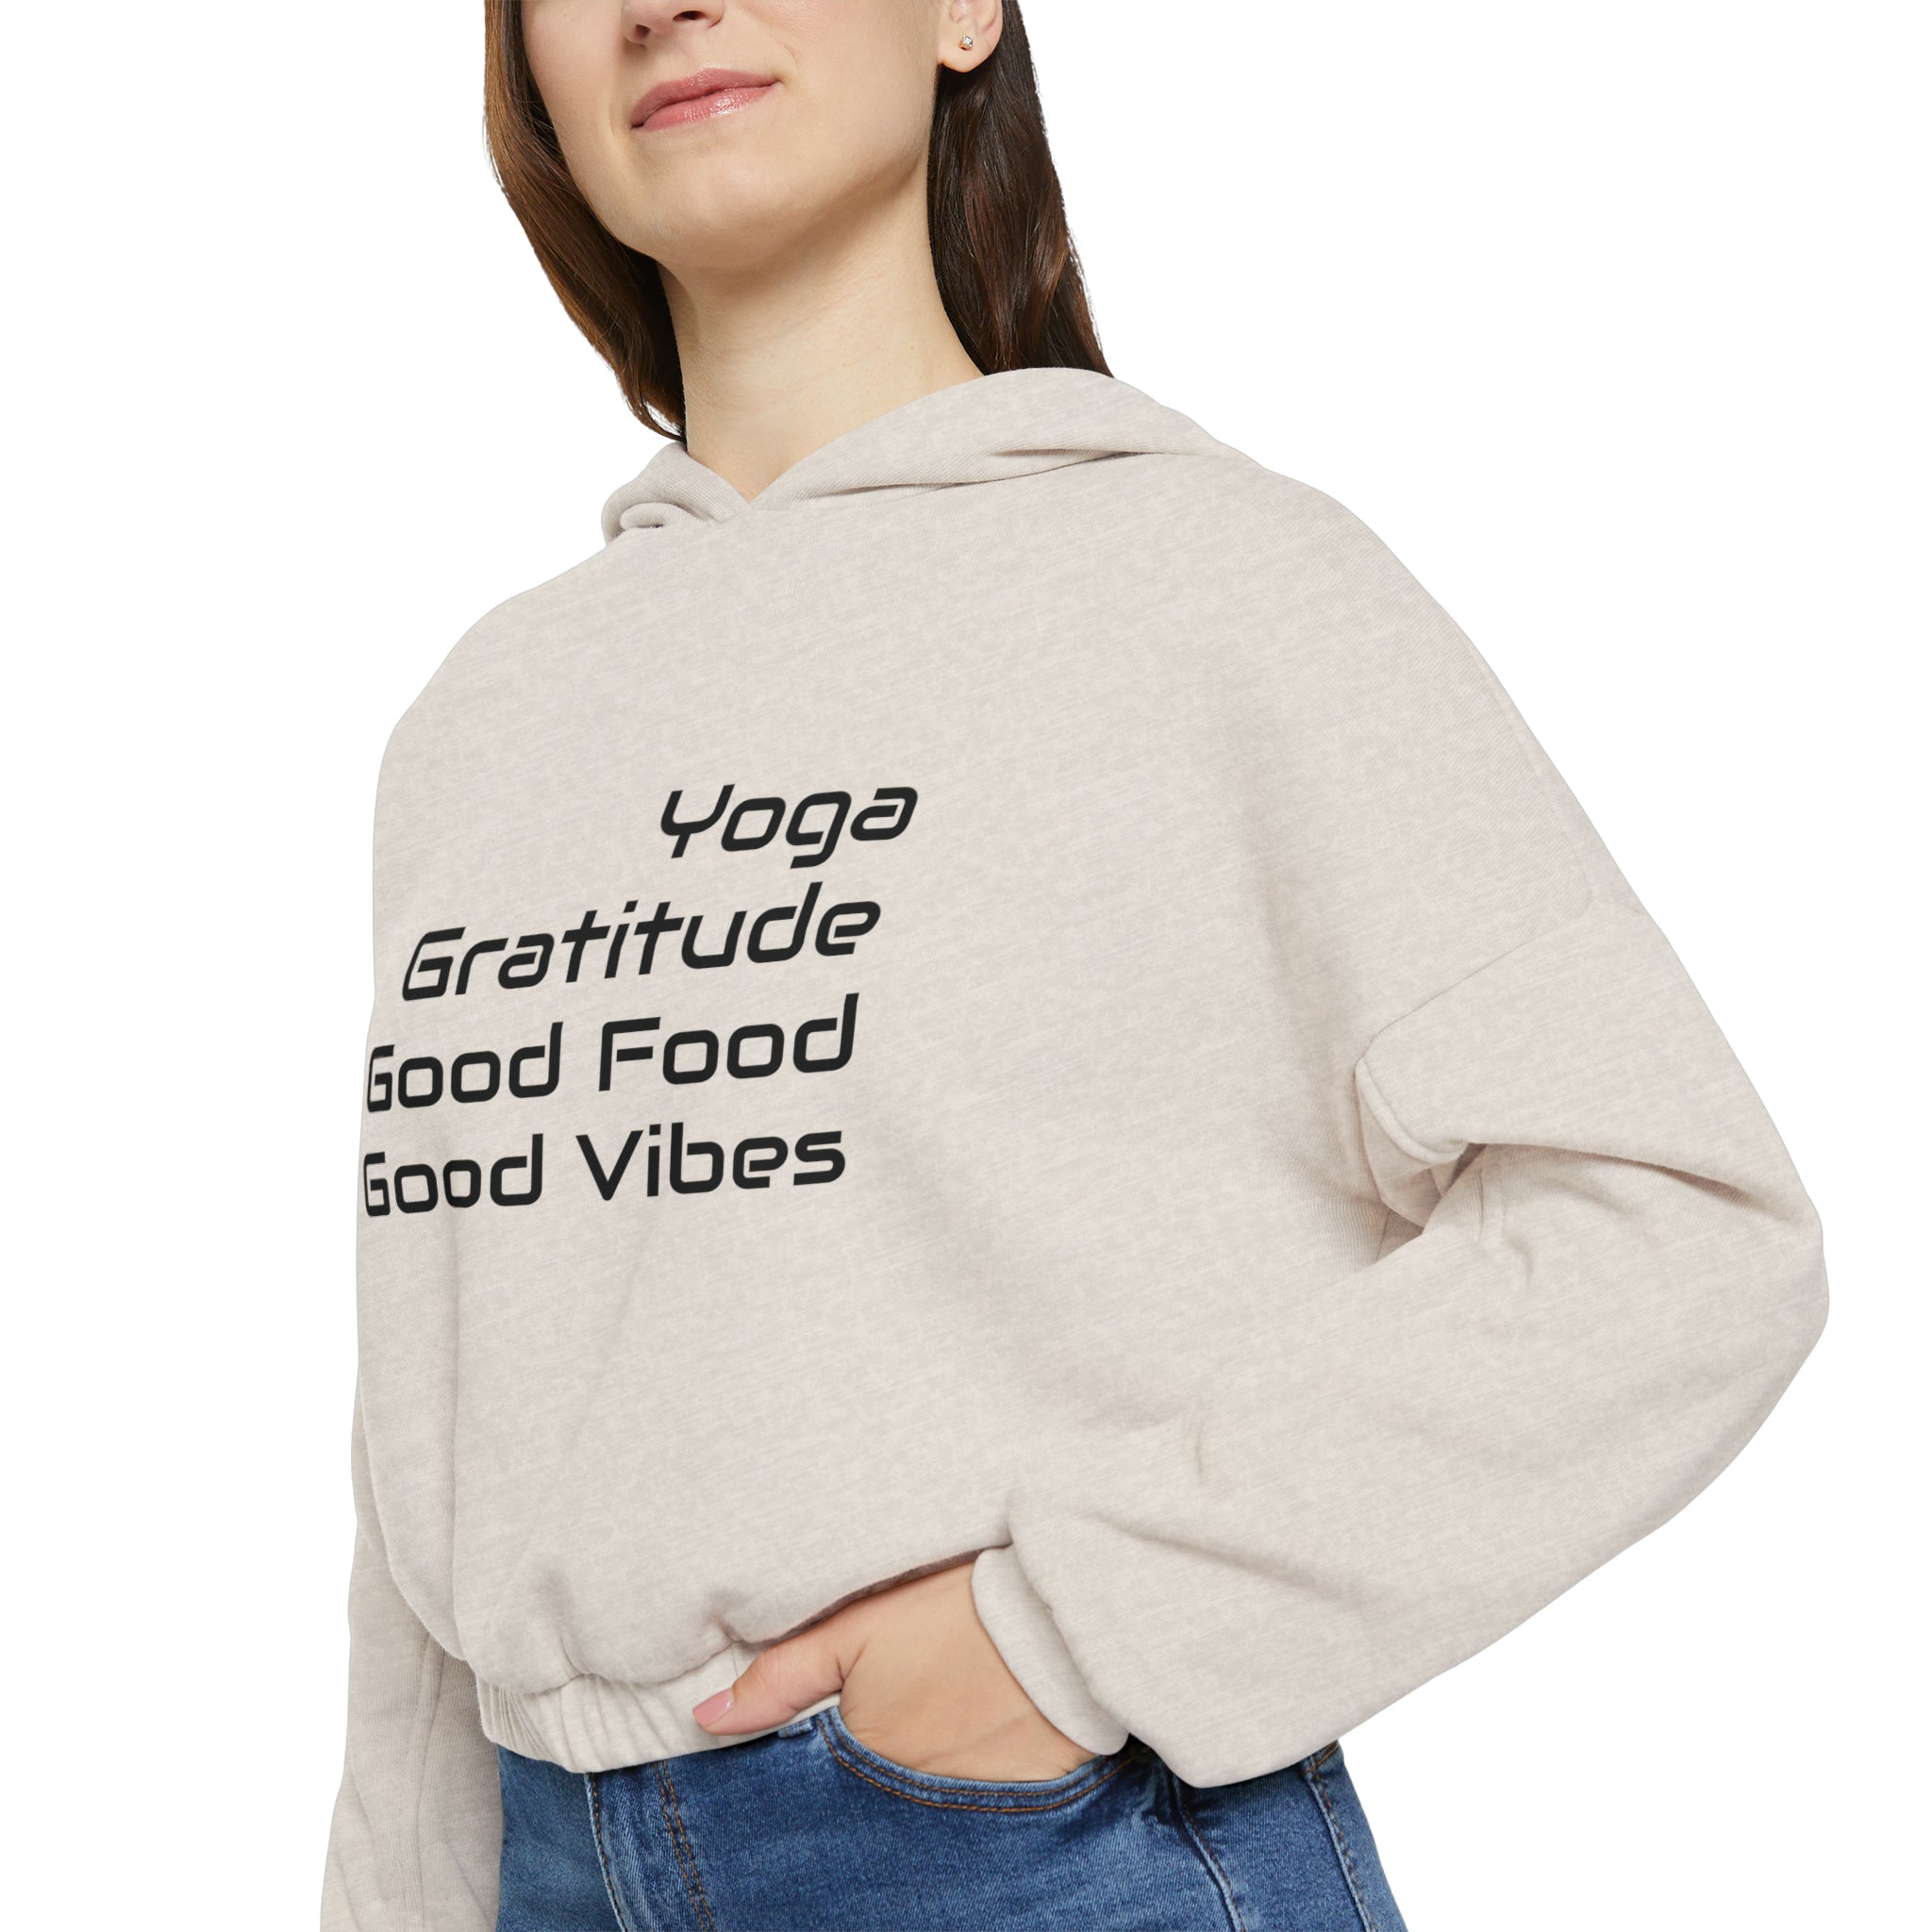 Yoga, Gratitude, Good Food and Good Vibes Cropped Women's Cinched Bottom Hoodie, Green, Gray, Black, Tan